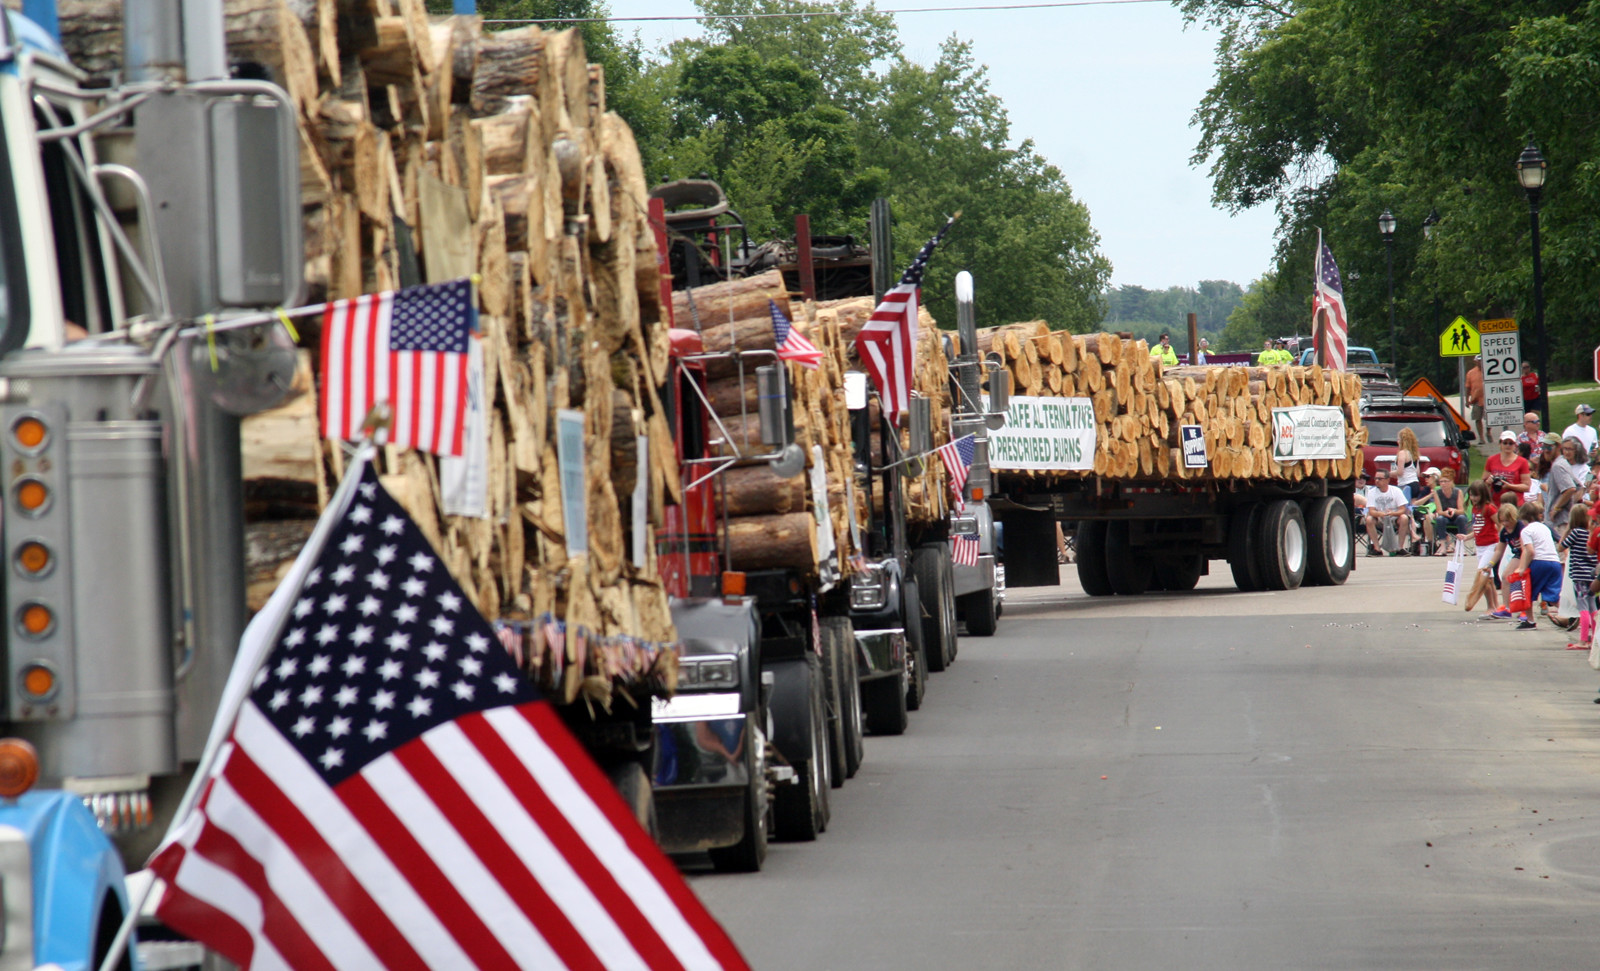 Lots of logging trucks in the Ely parade